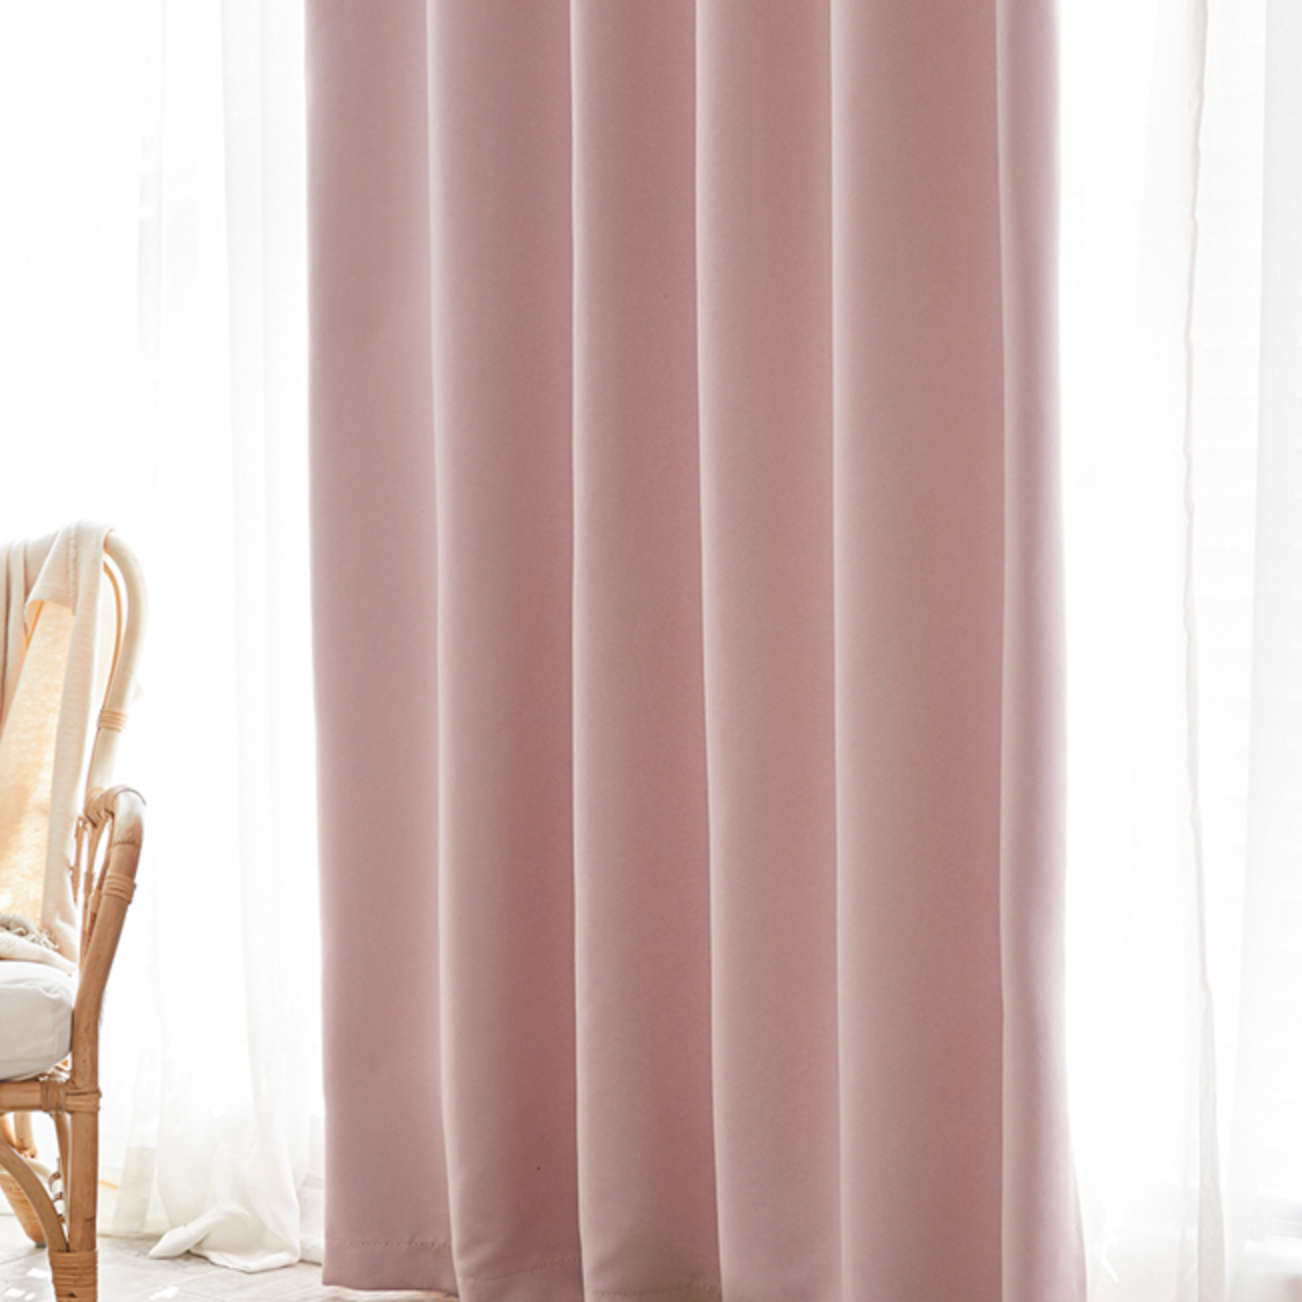 simple pink curtain